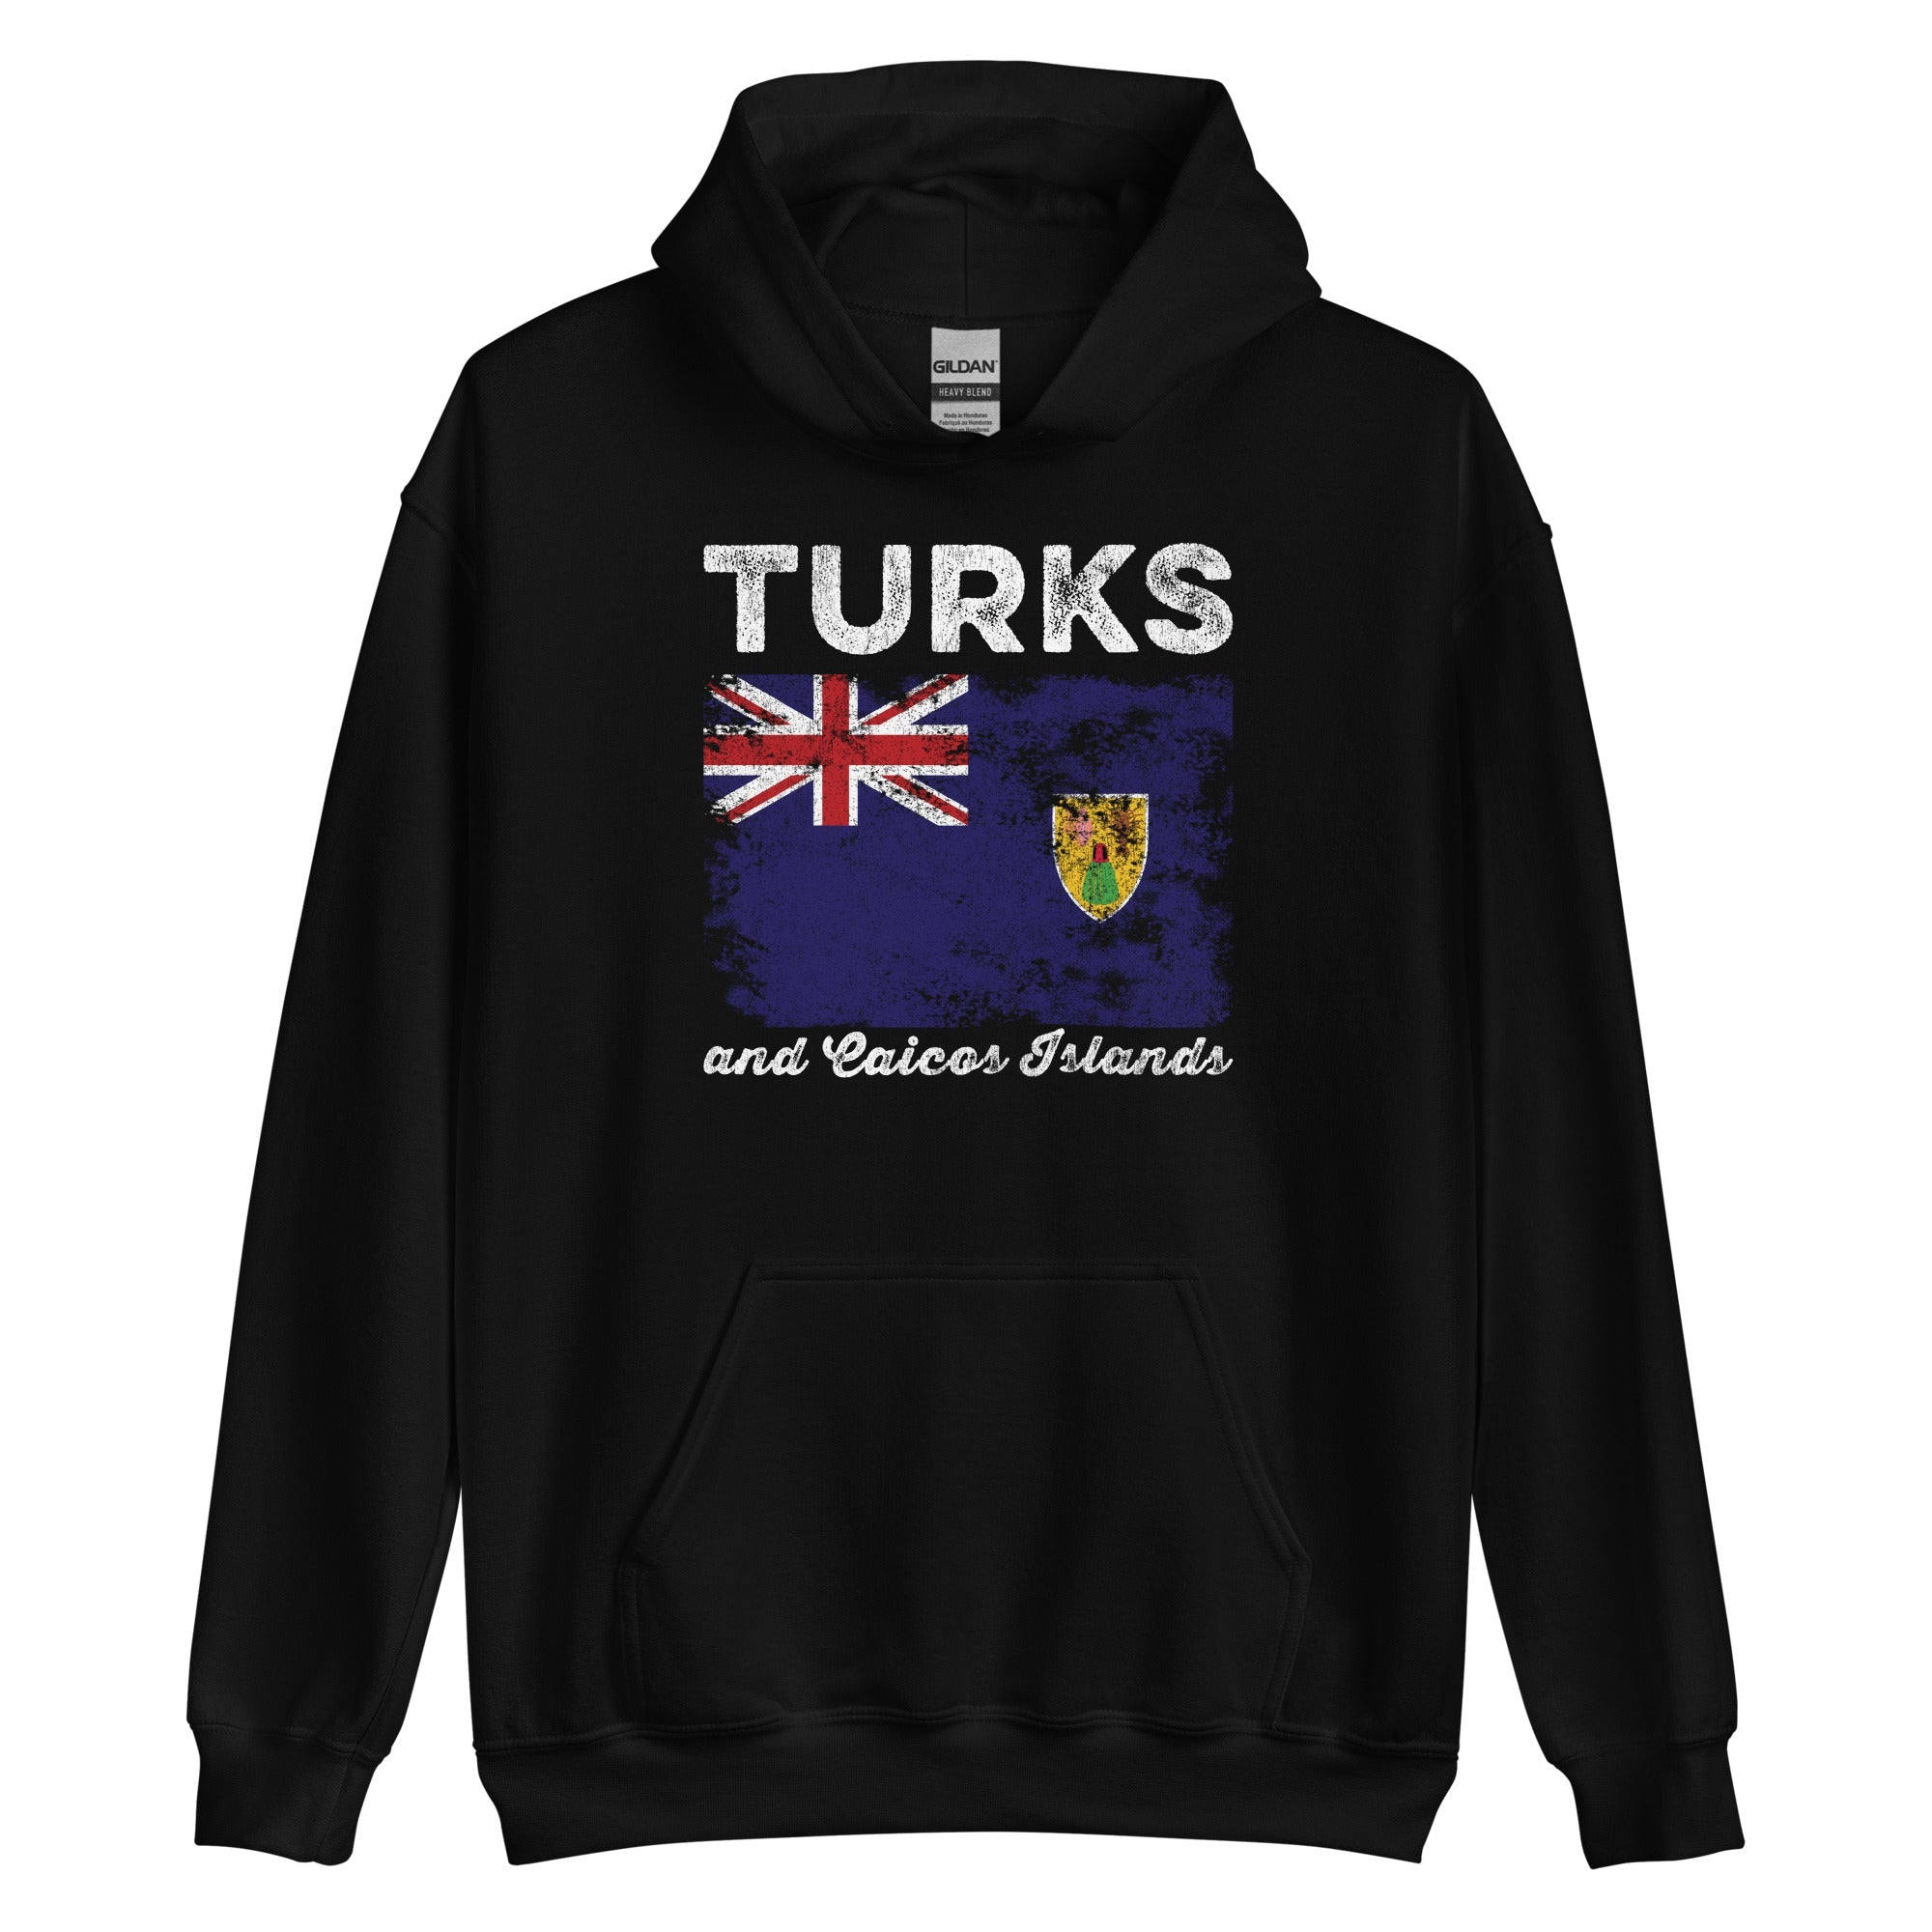 Turks and Caicos Islands Flag Distressed Hoodie